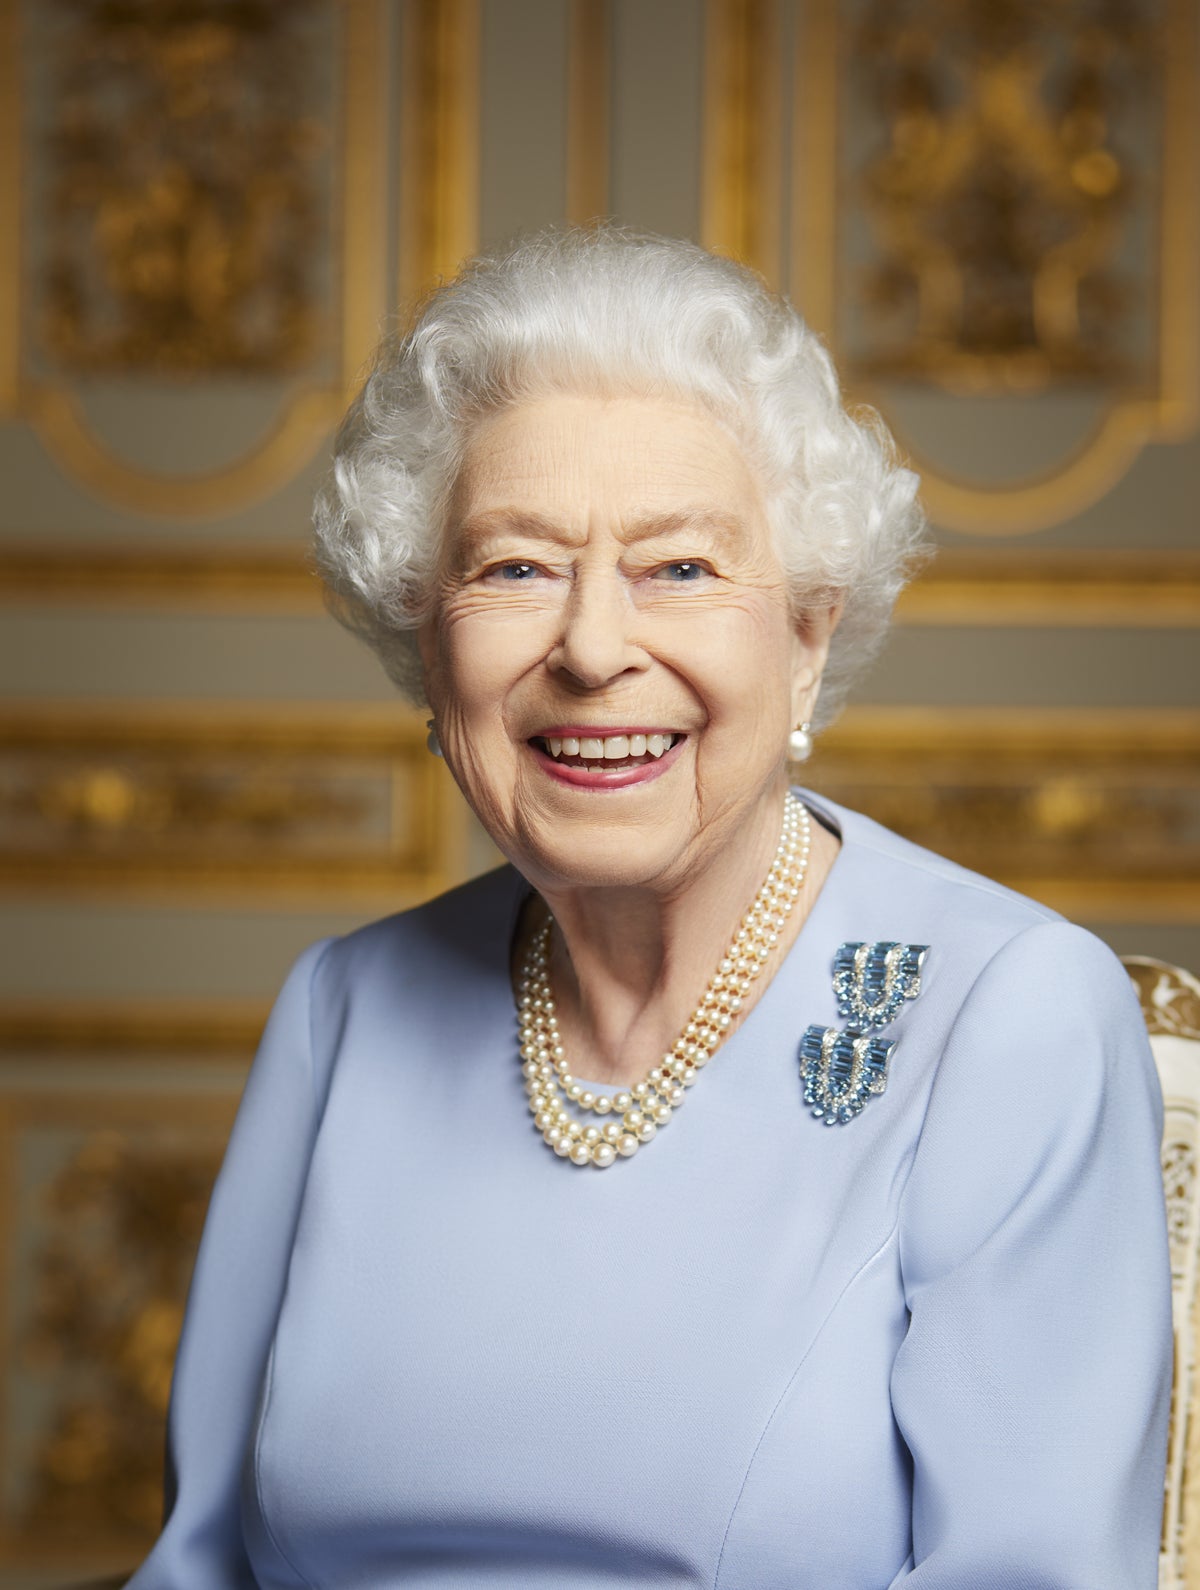 New portrait of smiling Queen released by Buckingham Palace ahead of funeral